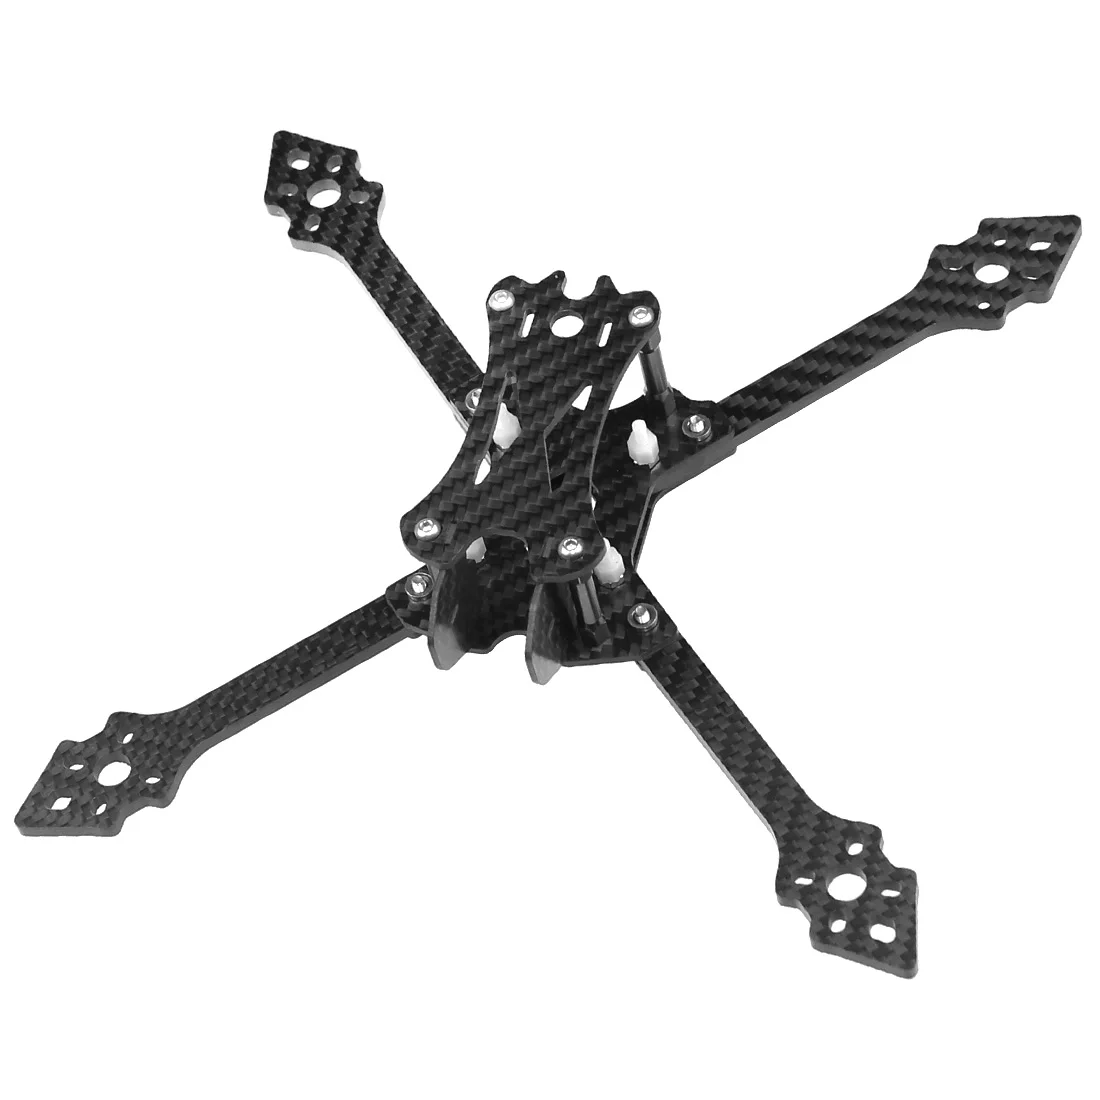 

Feichao X220 220mm Wheelbase Carbon Fiber Quadcopter Frame Kit 4mm Arms Support 5inch Propeller for FPV Racing Freestyle Drones